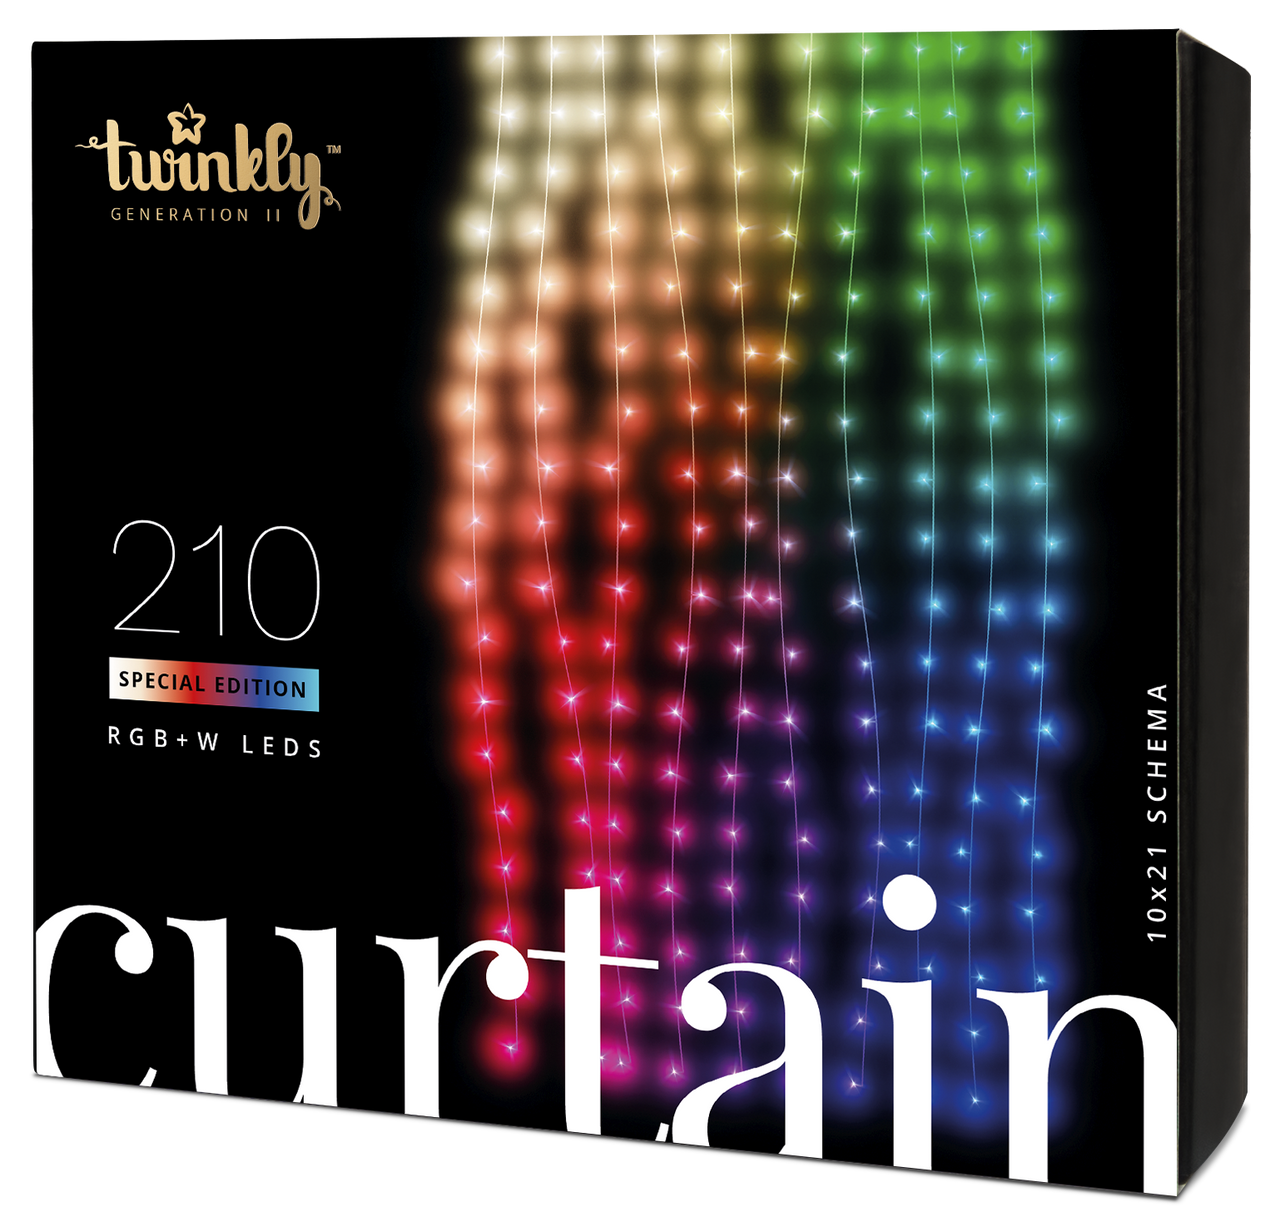 2.1m 210 LED Twinkly Smart App Controlled Curtain Light Special Edition